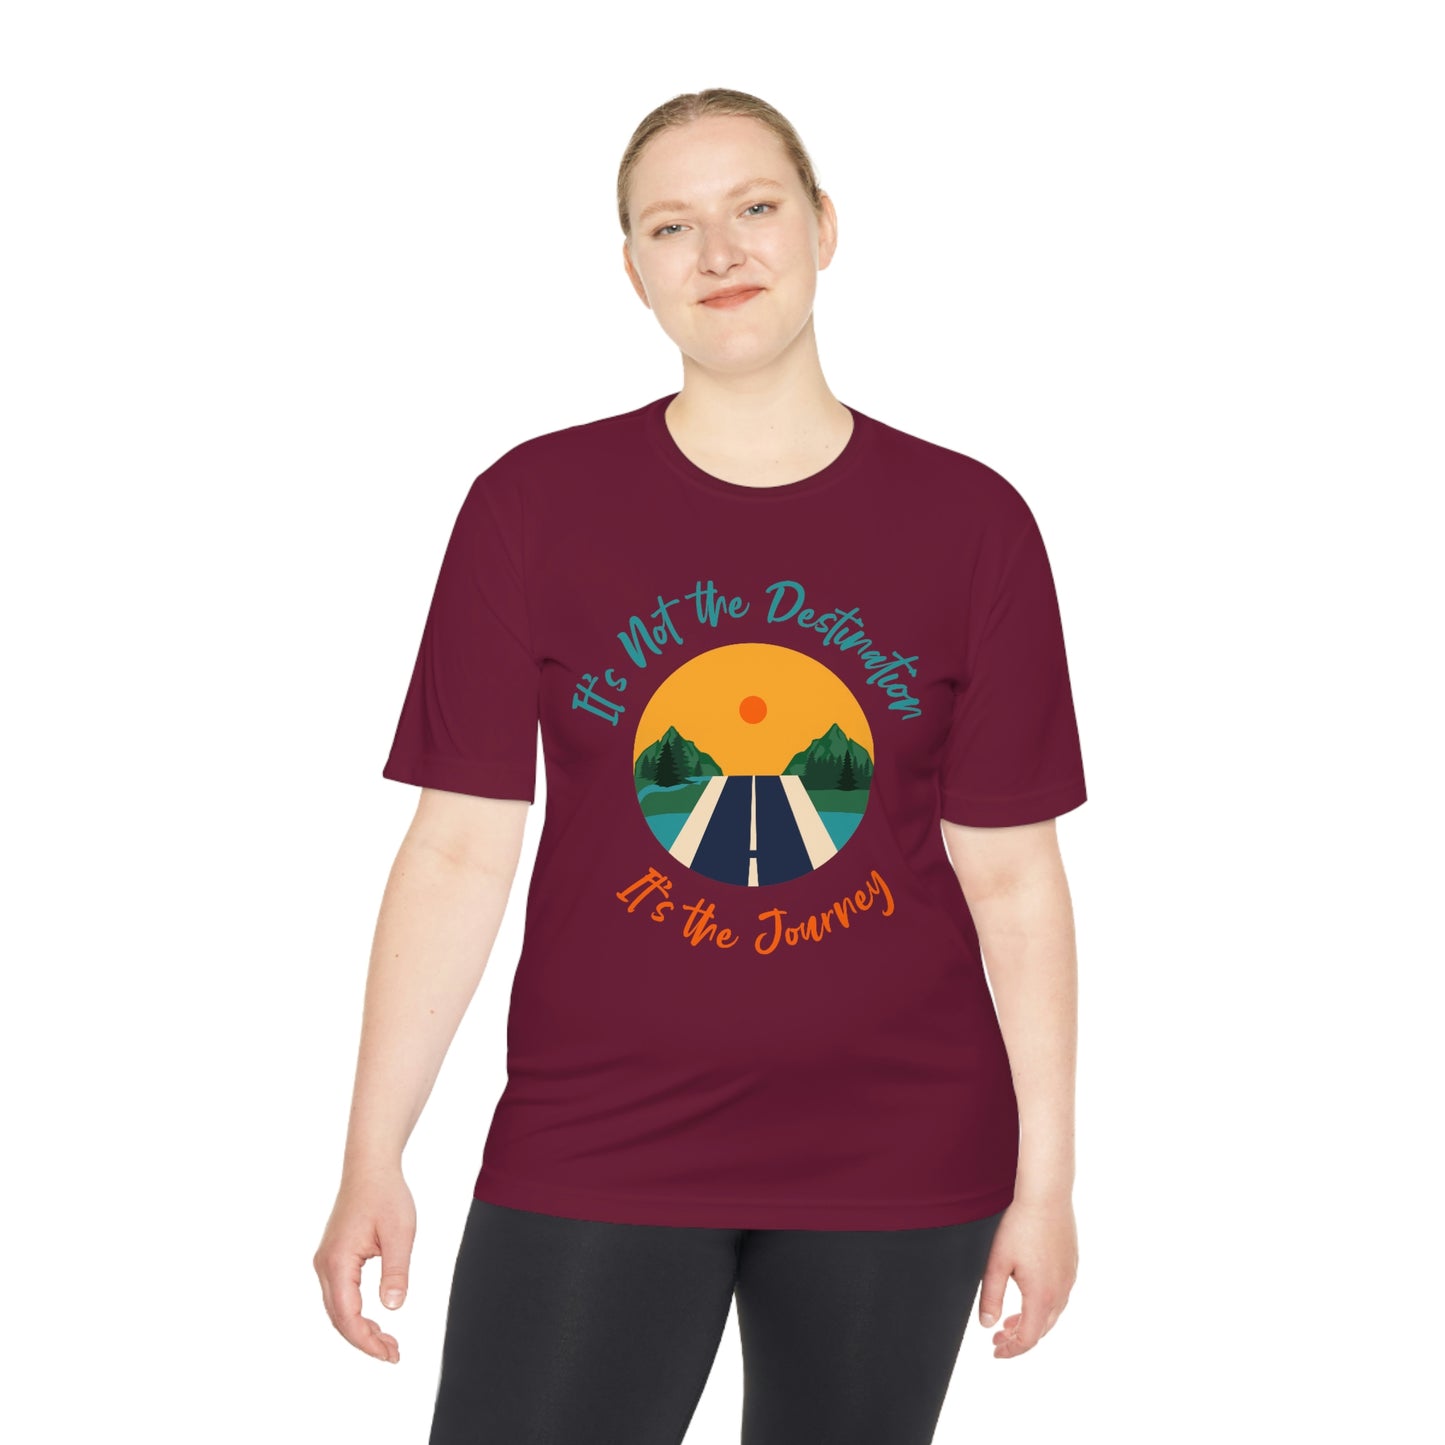 Mock up of the Cardinal t-shirt as worn by a woman